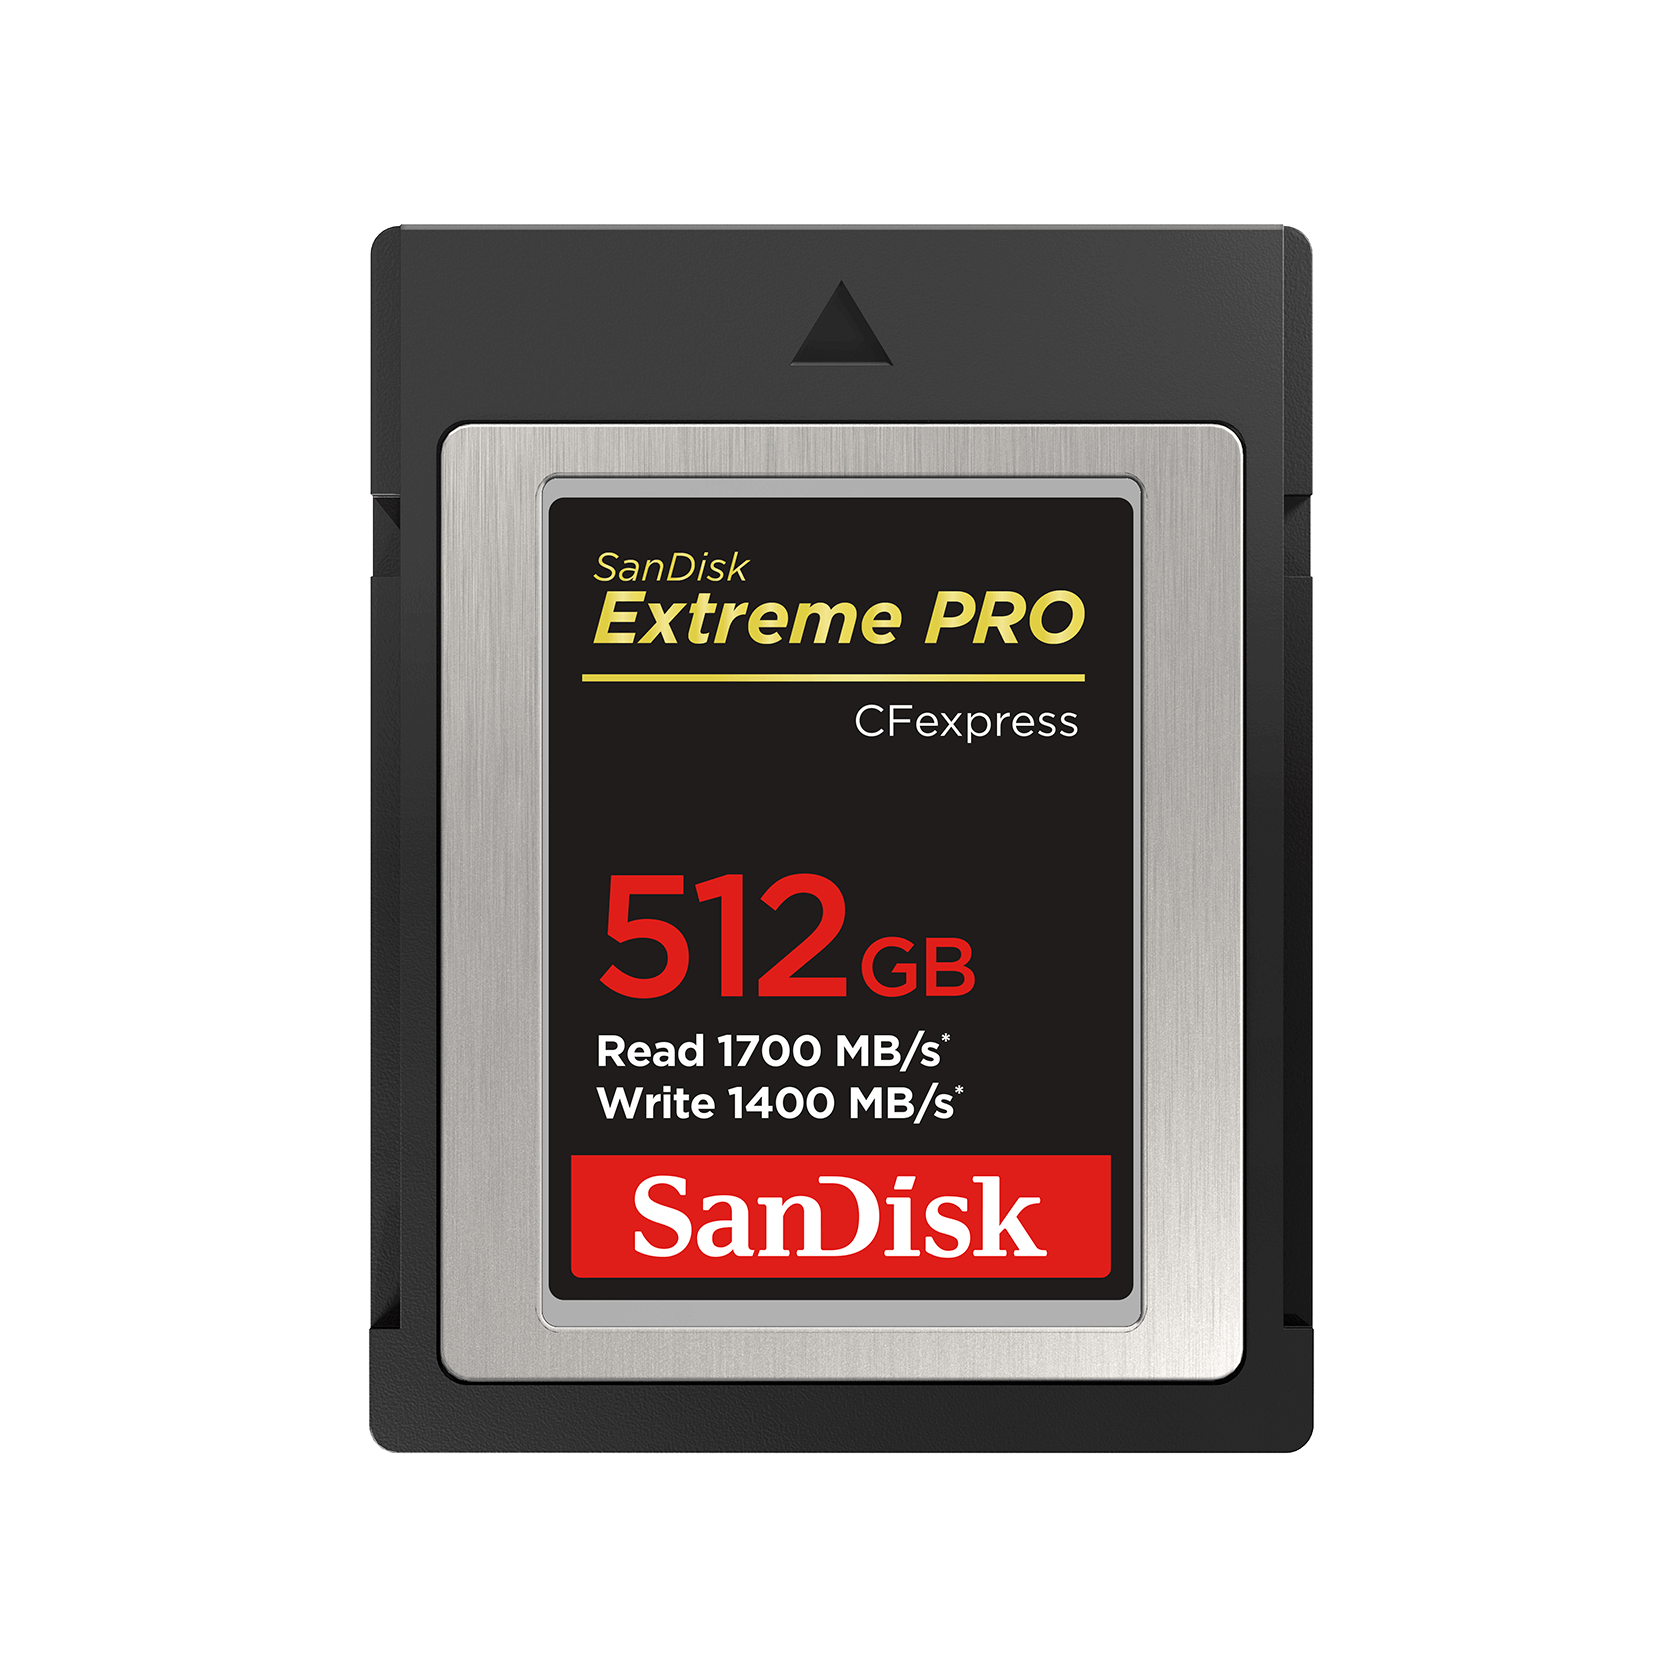 SanDisk Extreme ProÂ® CFexpressÂ® Memory Card Type B 512GB - SDCFE-512G-GN4NN